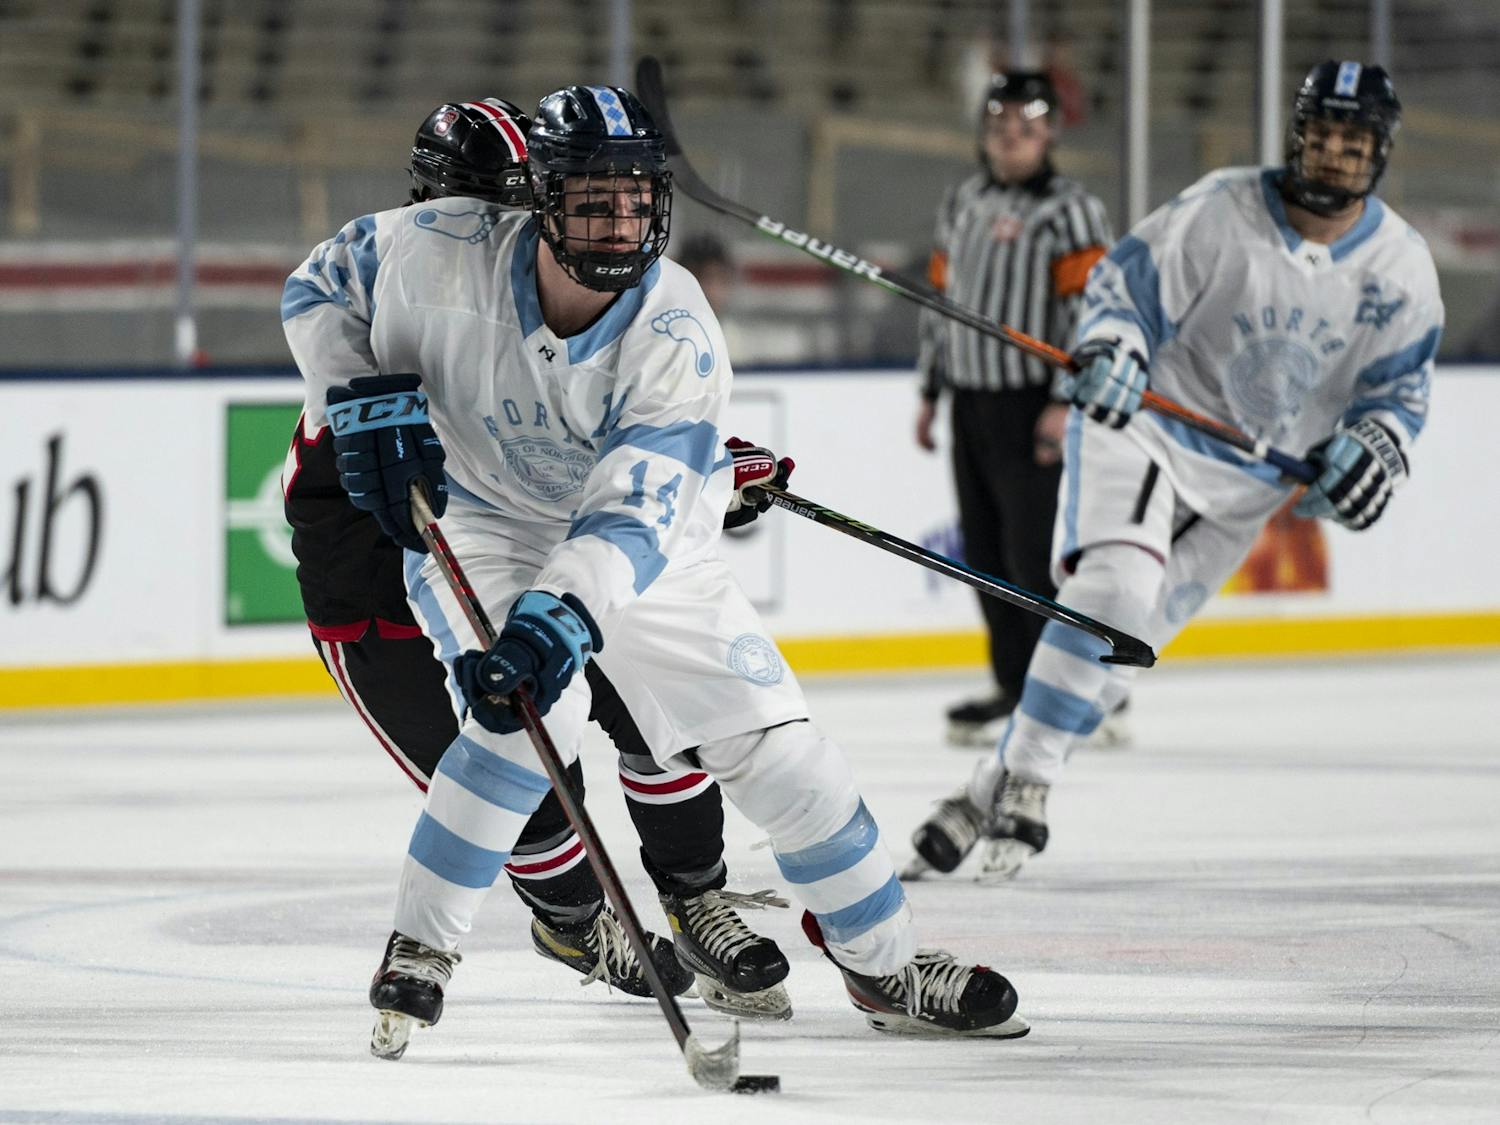 UNC forward Patrick O'Shaughnessy (14) transitions the puck across the rink during the ice hockey game against N.C. State at Carter-Finley Stadium on Monday, Feb. 20, 2023. UNC lost 3-7.